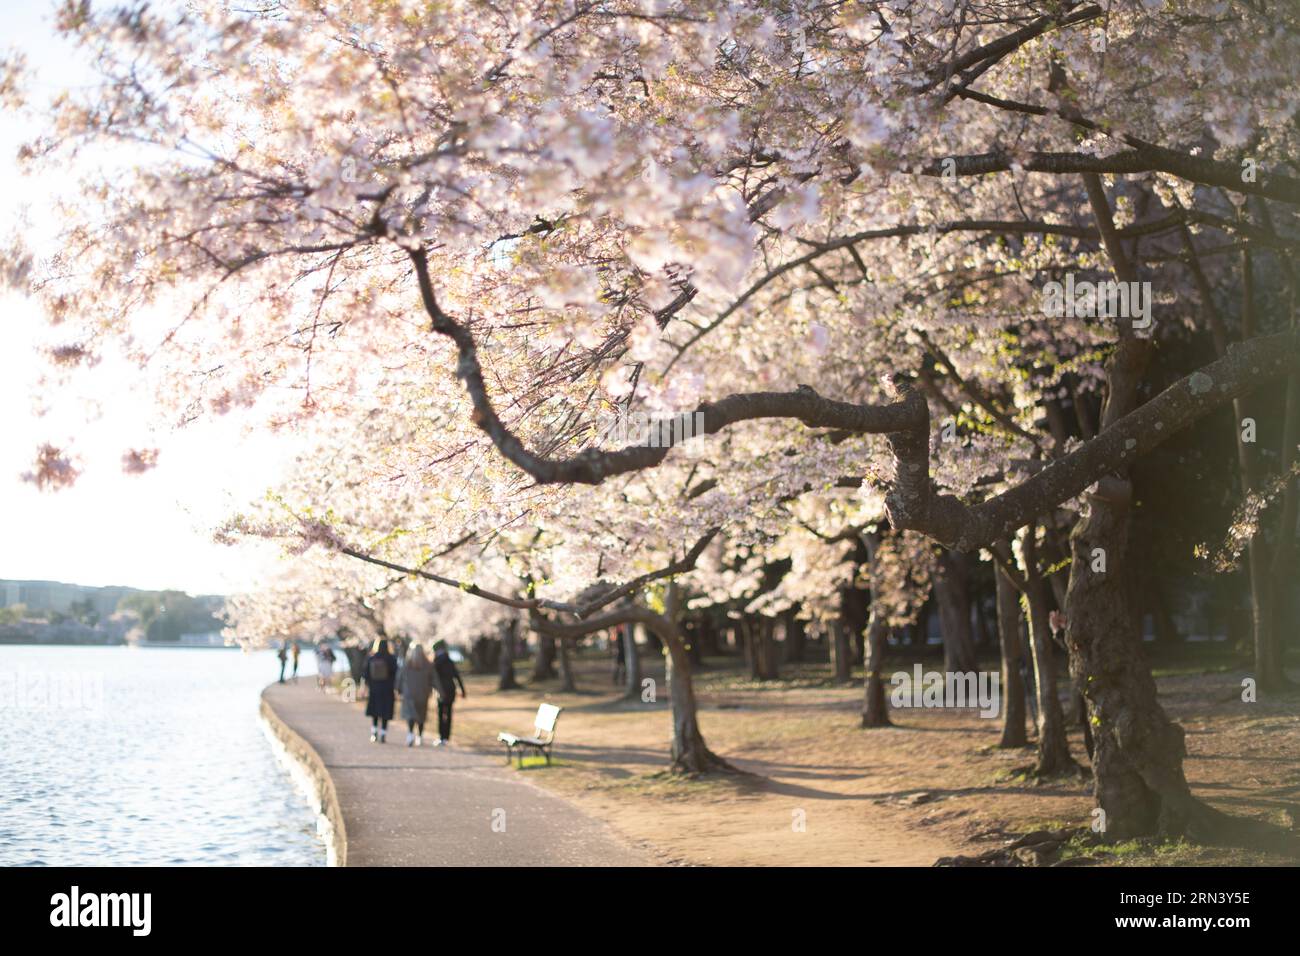 WASHINGTON DC, United States — Cherry blossoms in full bloom envelope the Tidal Basin, marking the onset of spring in the nation's capital. This annual event draws thousands, symbolizing the enduring friendship between the U.S. and Japan, a gift from Tokyo in 1912. Stock Photo